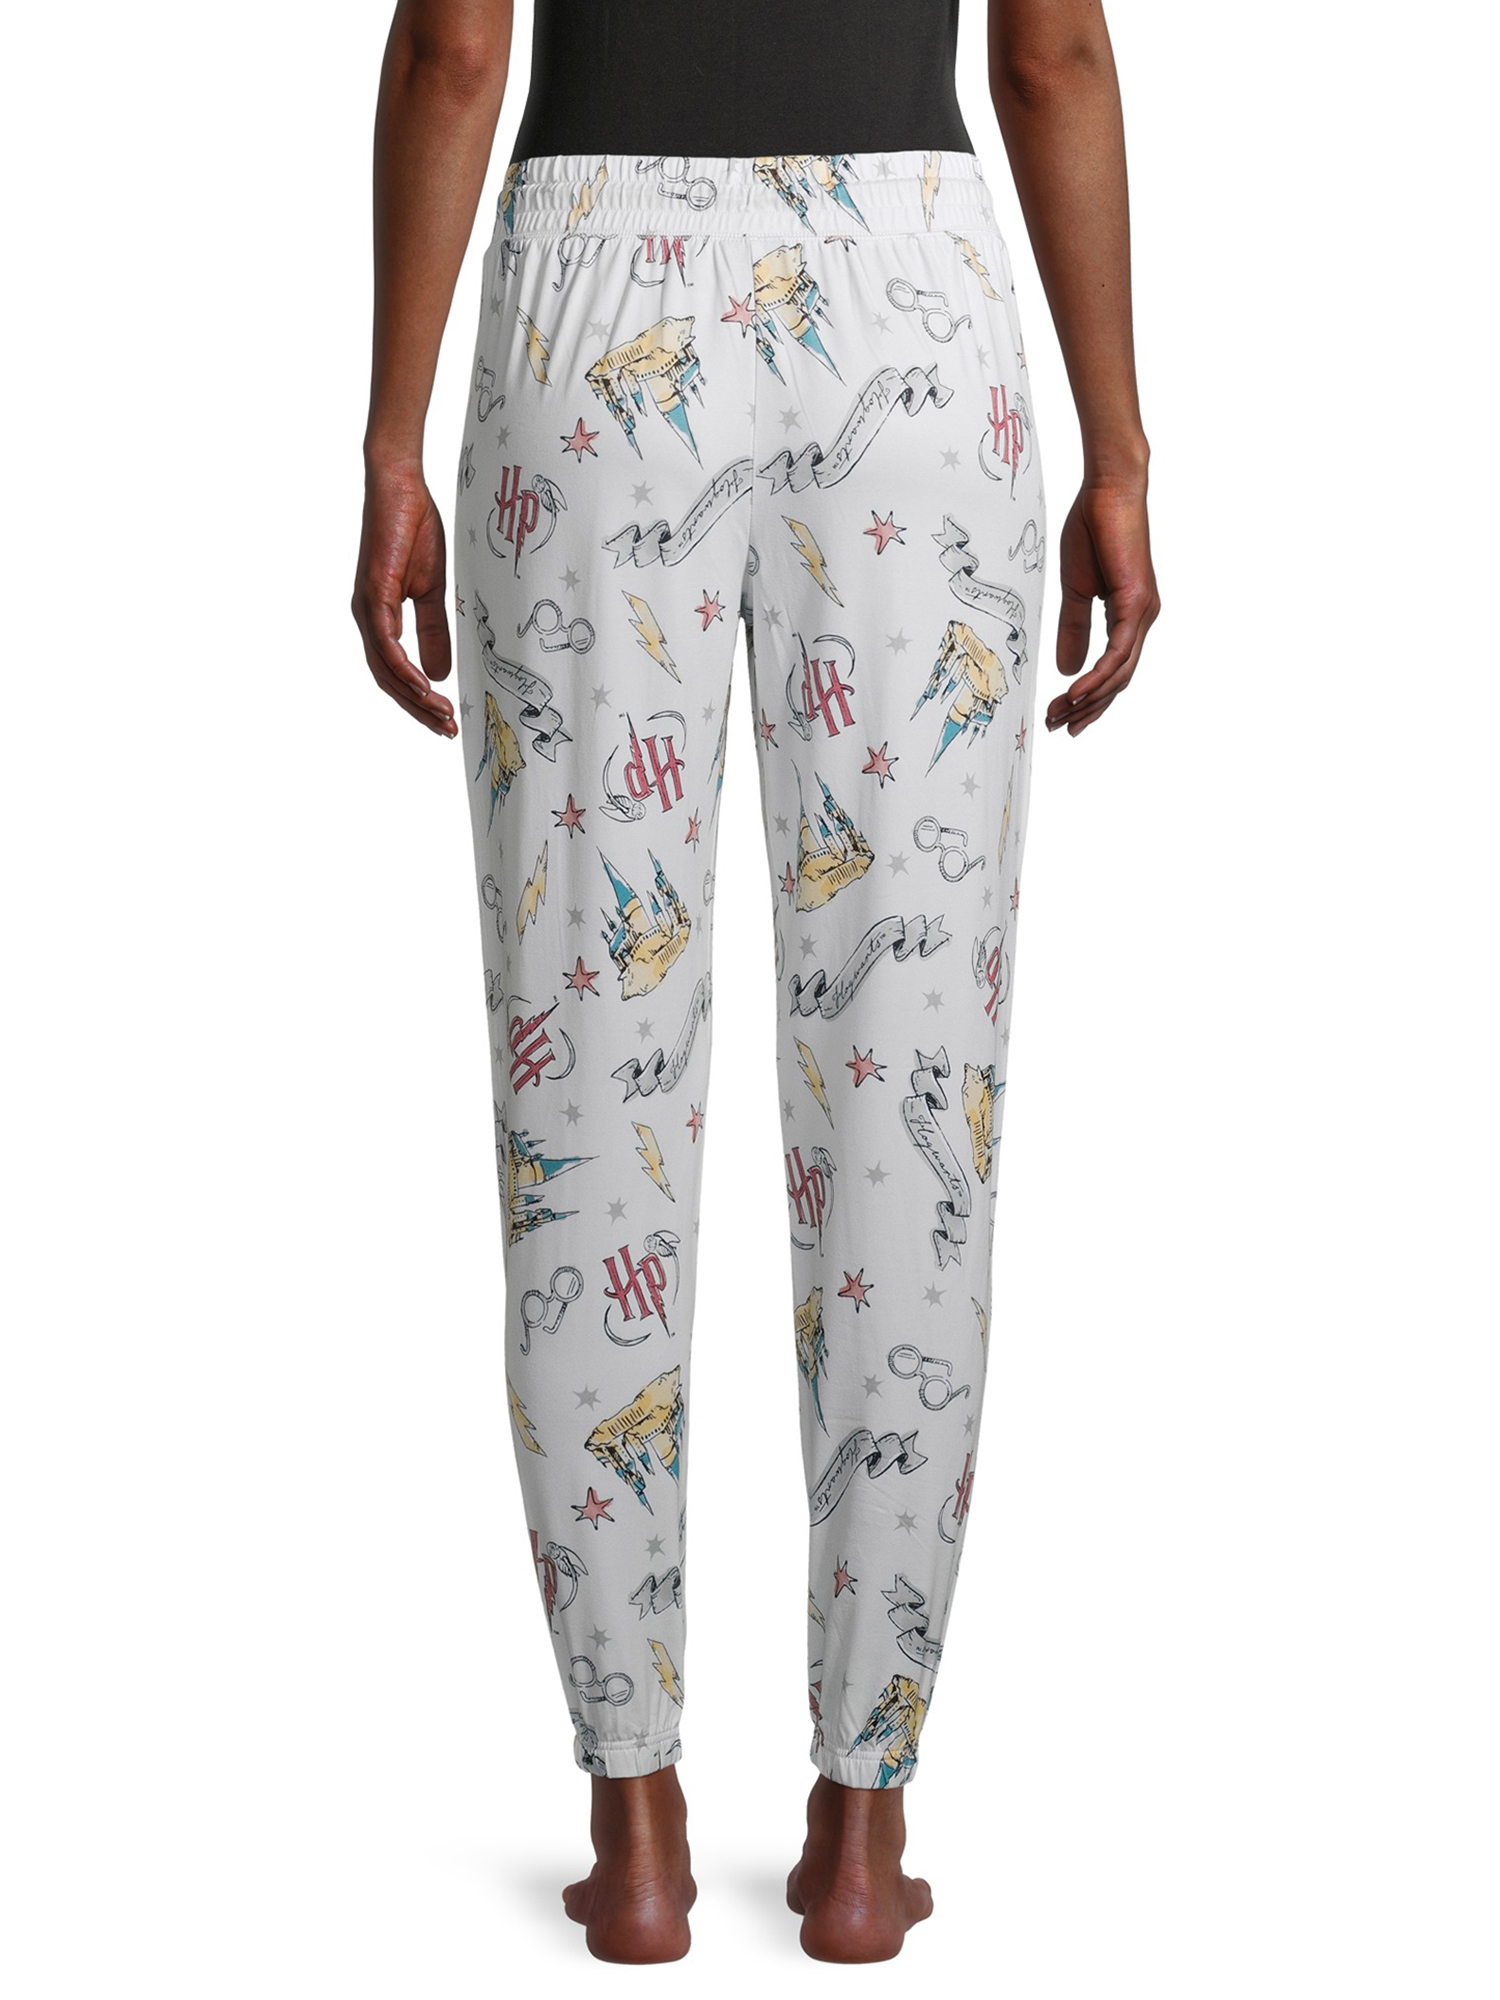 Womens and Women's Jogger Pant - Harry Potter - image 3 of 6